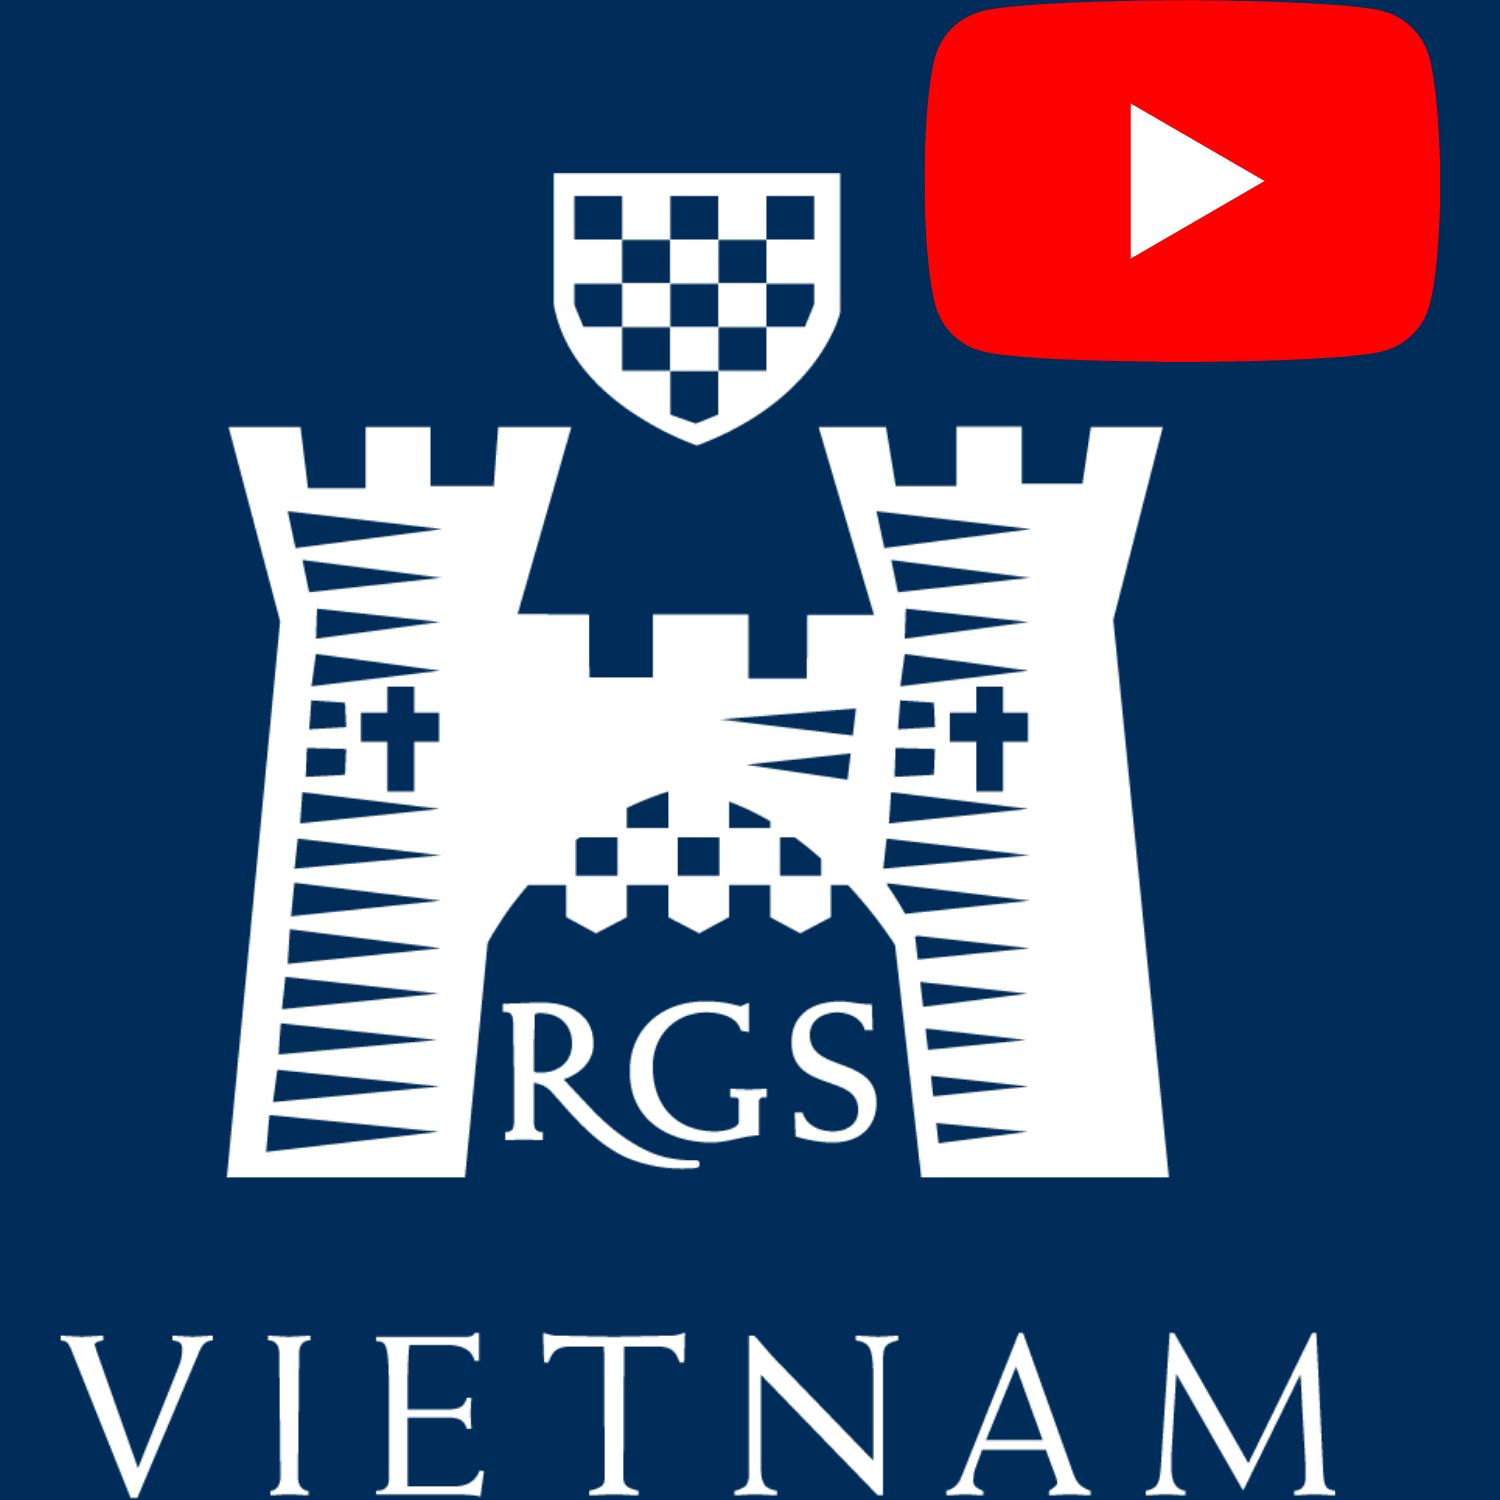 RGSV Official Youtube Channel